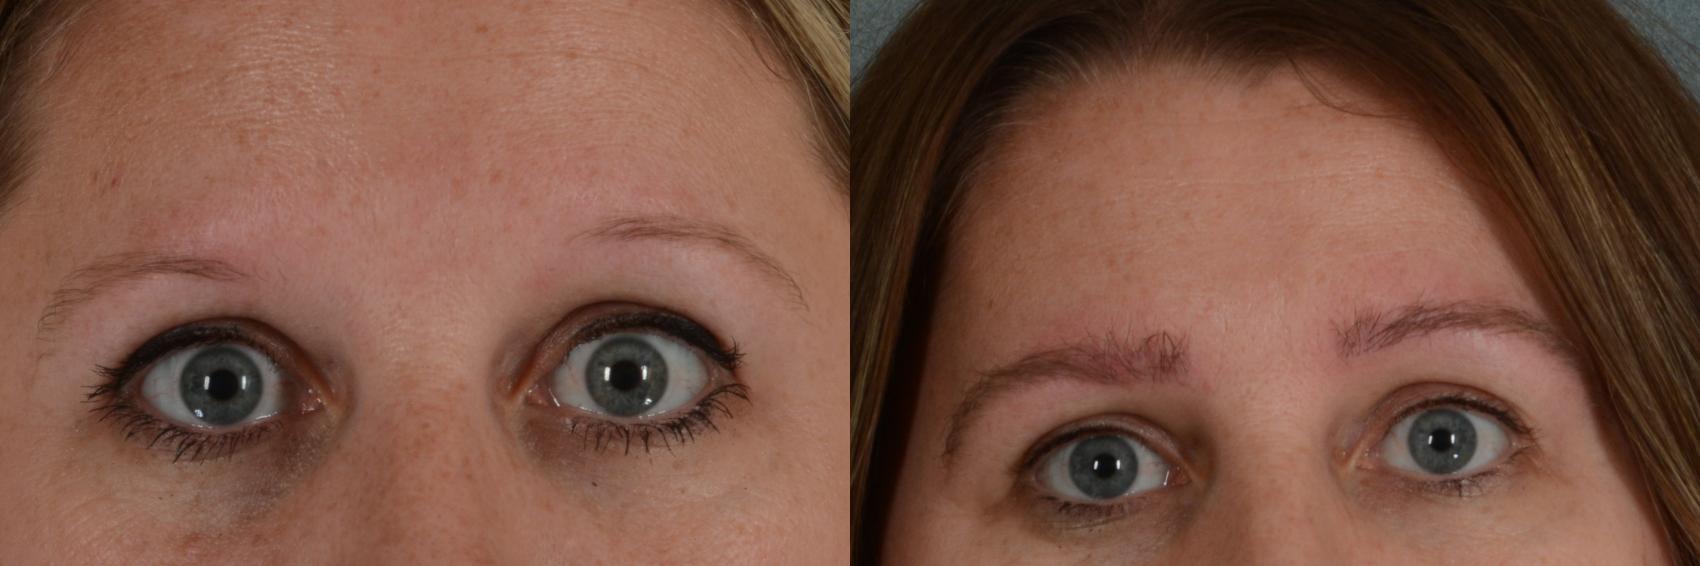 Hair Transplant (Eyebrows) Before and After Photo Gallery | Tallahassee, FL  | Southeastern Plastic Surgery, .